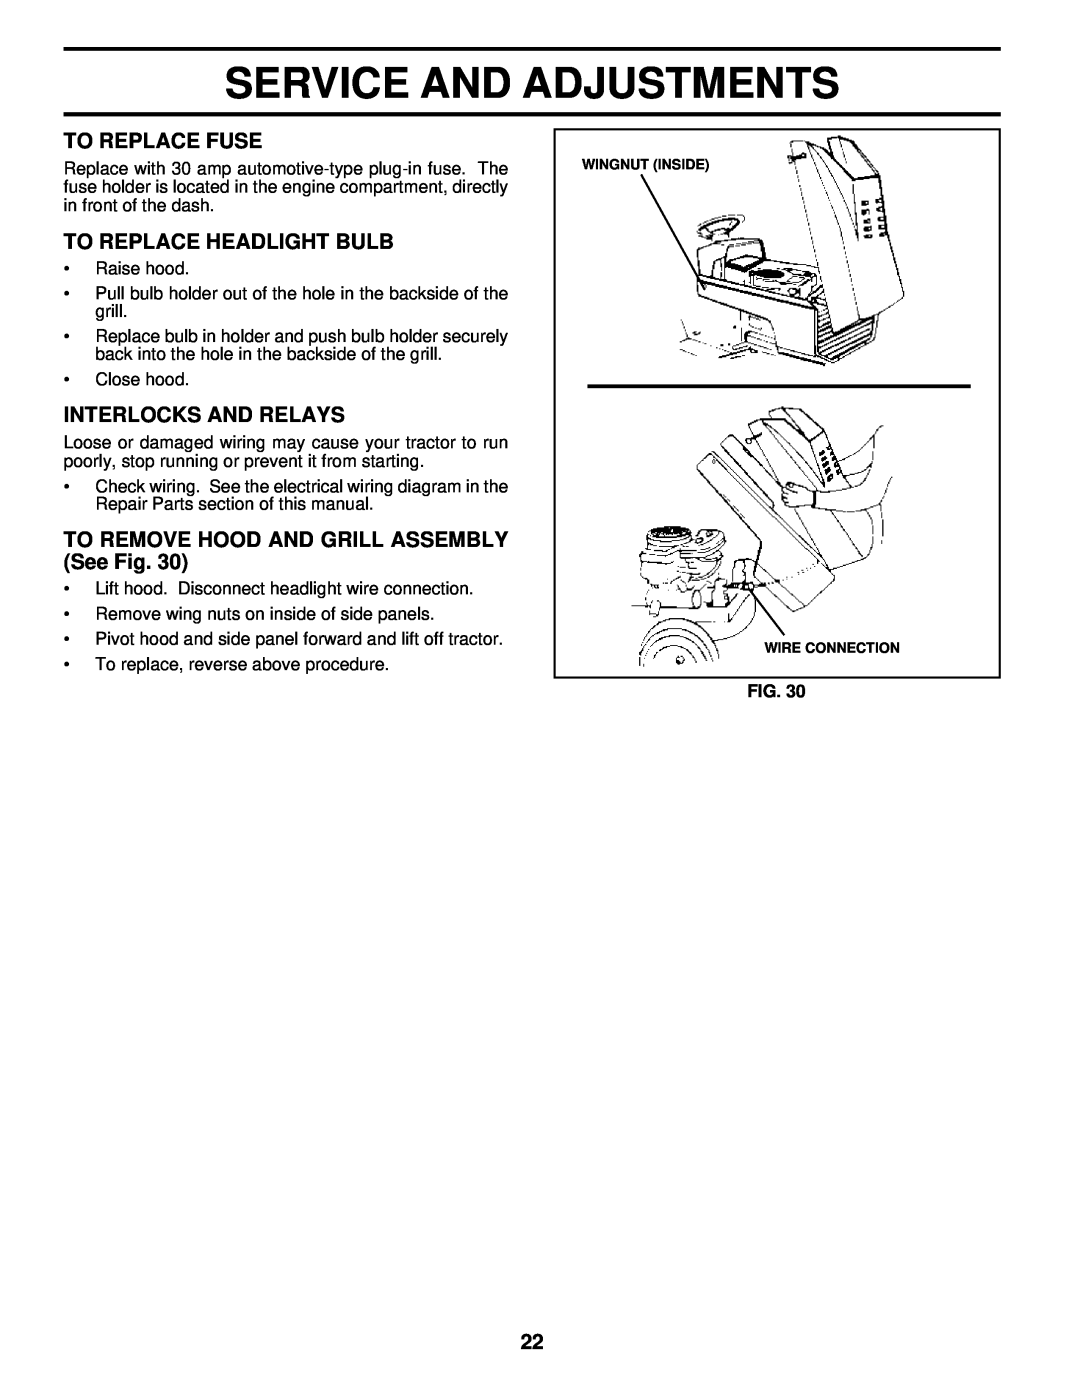 Husqvarna YT180 owner manual To Replace Fuse, To Replace Headlight Bulb, Interlocks And Relays, Service And Adjustments 